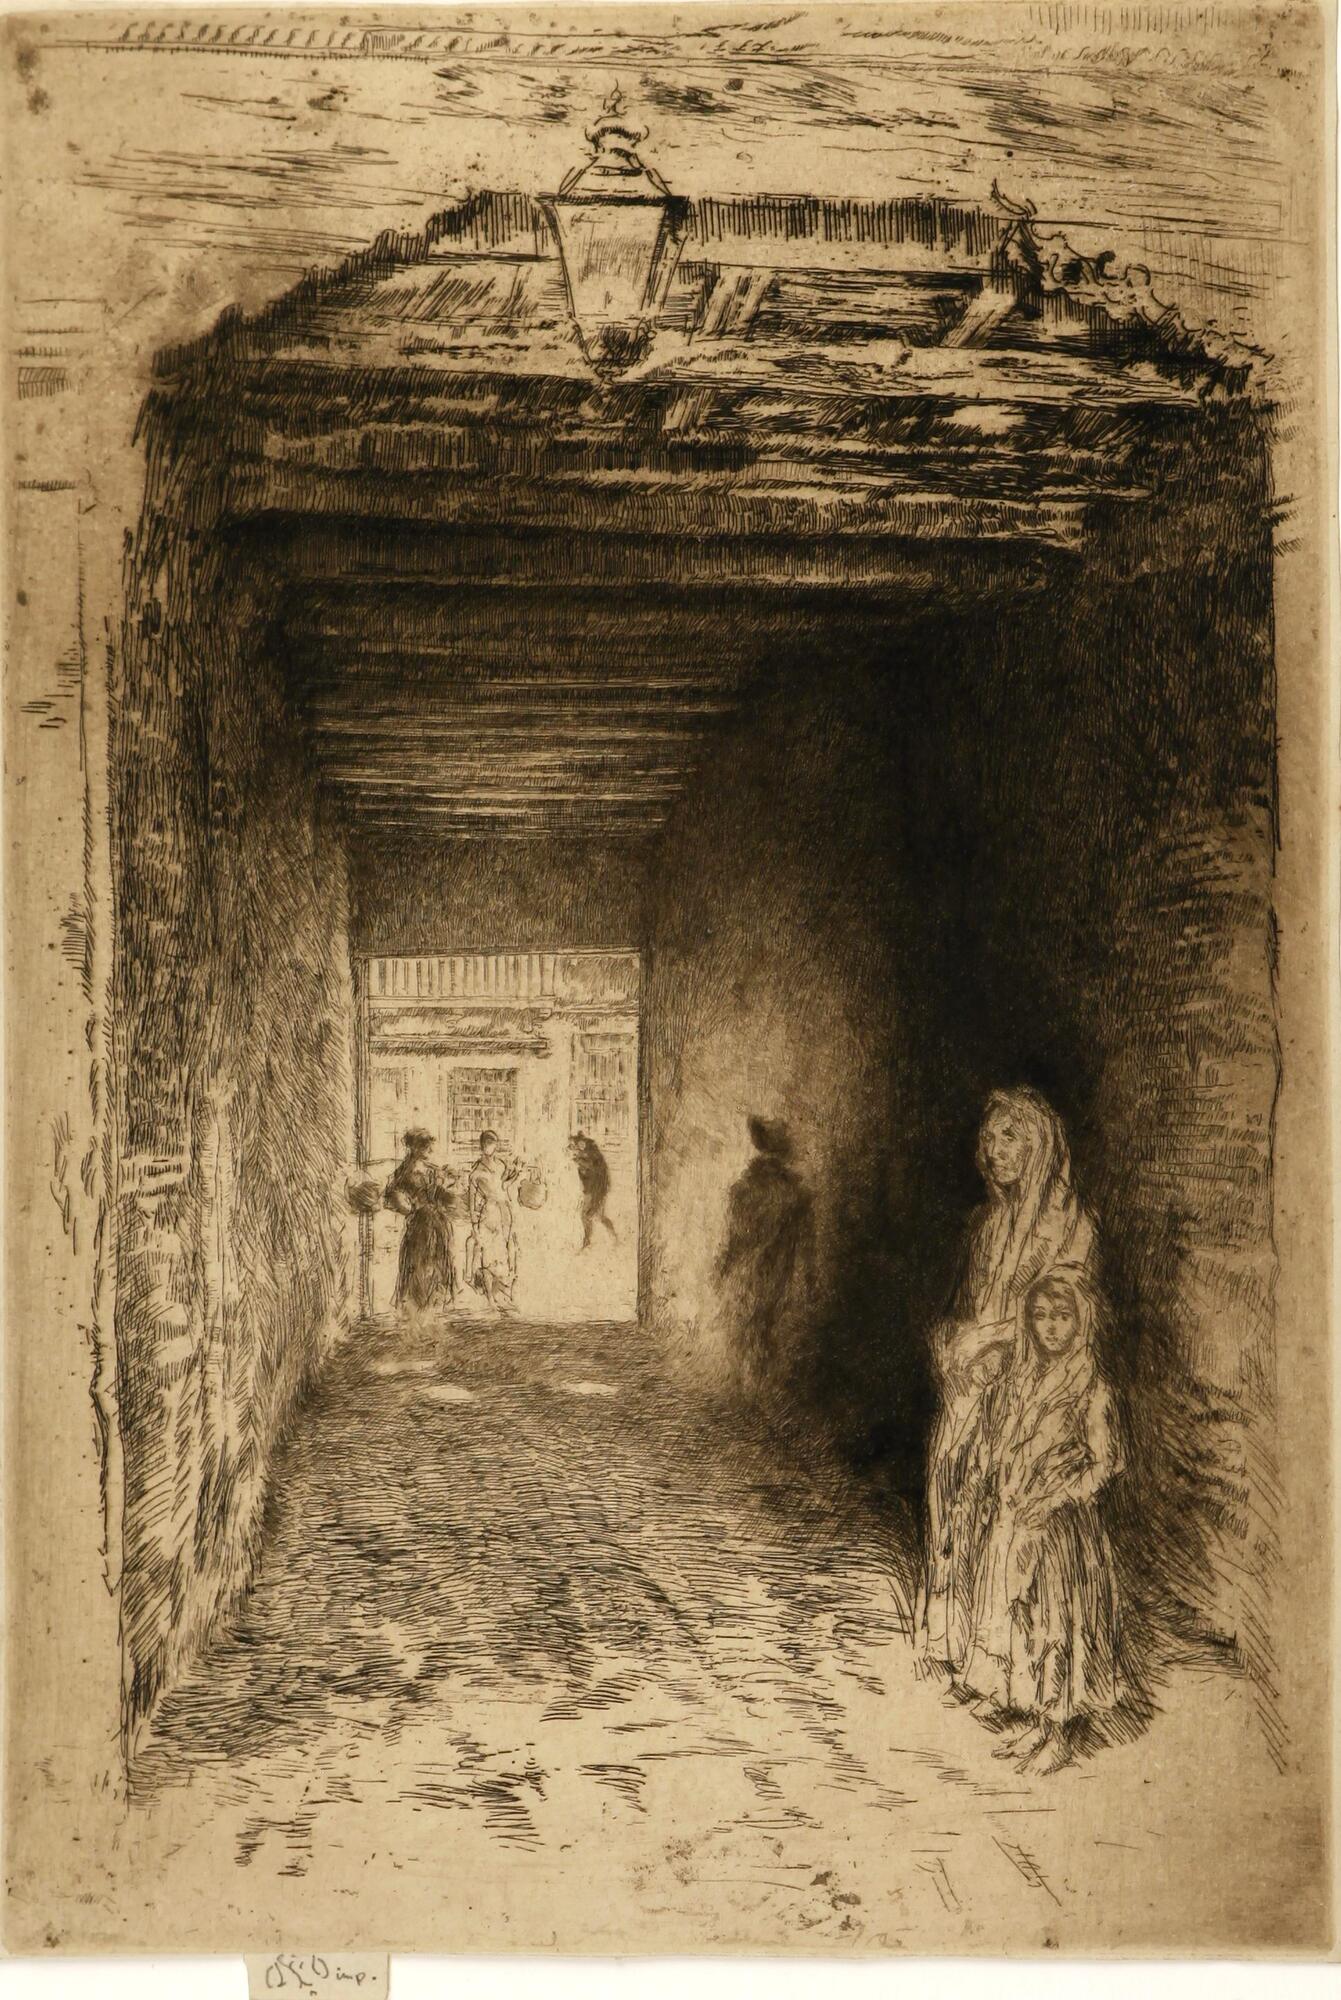 A deep covered passageway dominates the composition. At the near end of the passage, to the right side, stand a woman and young girl, both with heads covered and looking at the viewer. Looking down the passageway, light catches the timbered ceiling and figures can be seen walking at the far end, silhouetted against the bright light in the square or street beyond. A lantern hangs above the entrance at the near end of the passage.